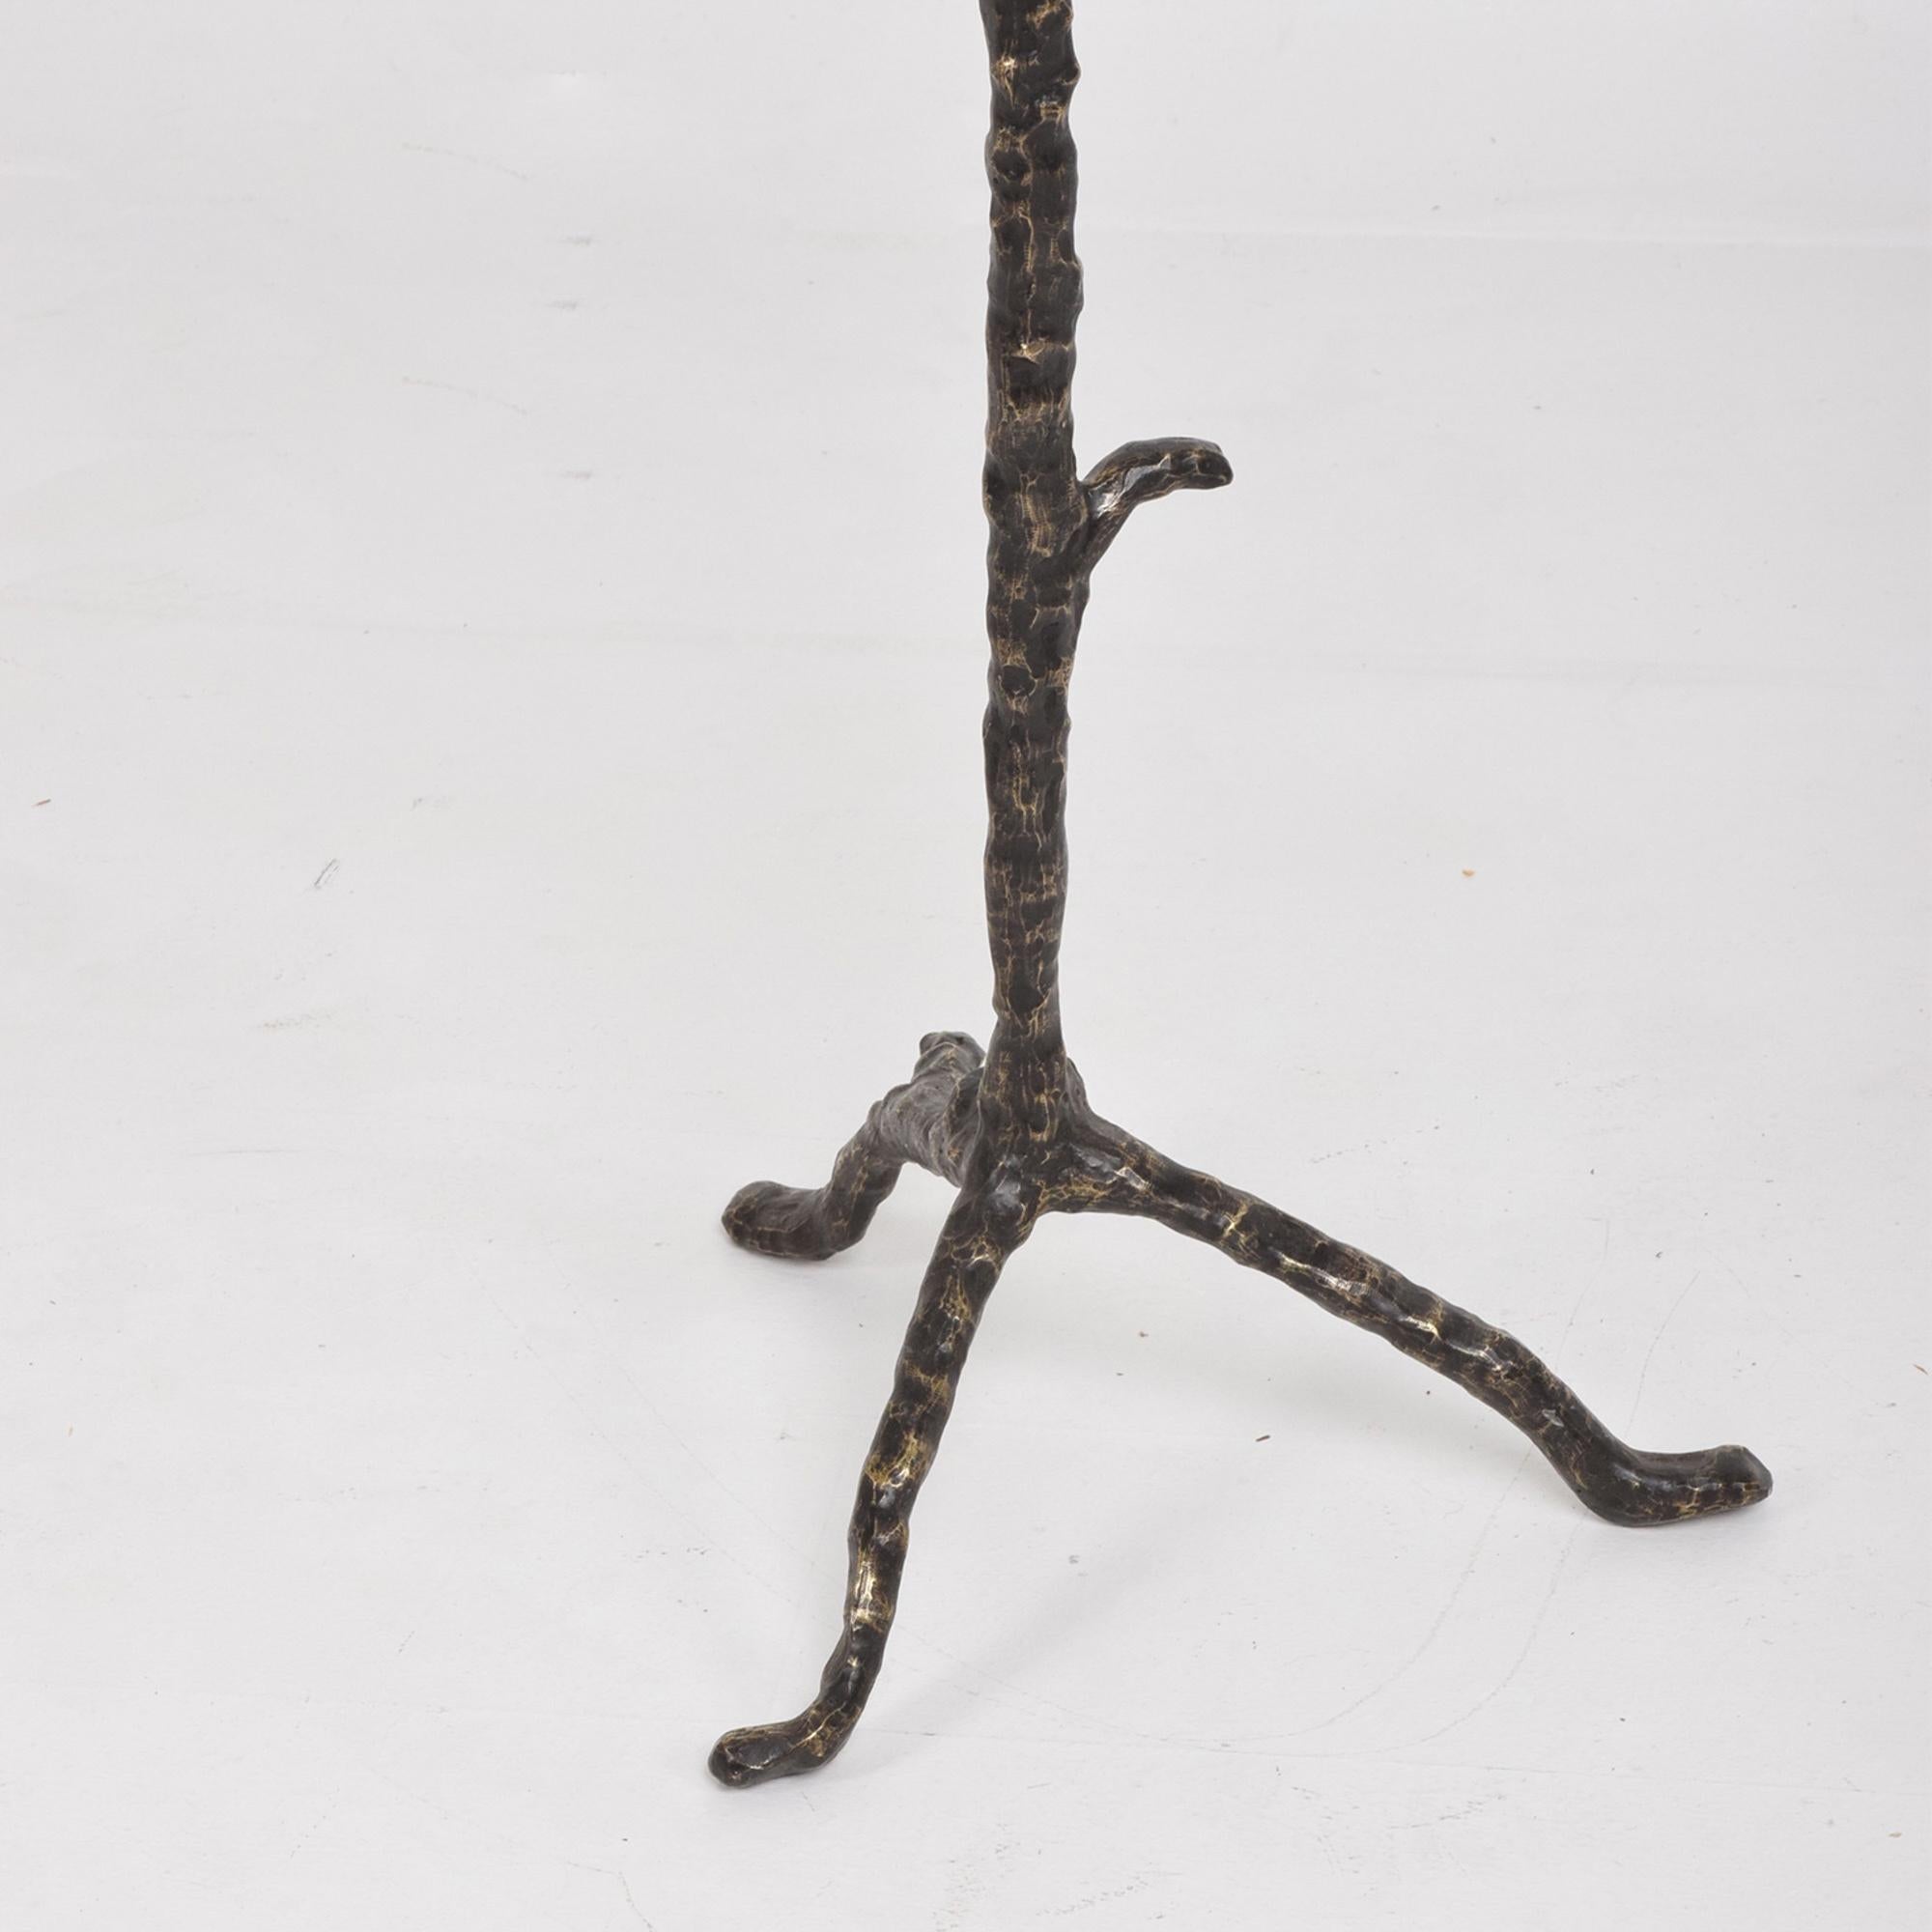 1960s Giacometti inspired sculpted tree coat rack in bronze Mid-Century Modern
Dimensions: Height 60.5 in. (153.67 cm)
Width 29 in. (73.66 cm)
Depth 20 in. (50.8 cm)
Wear consistent with age and use. Original unrestored preowned vintage